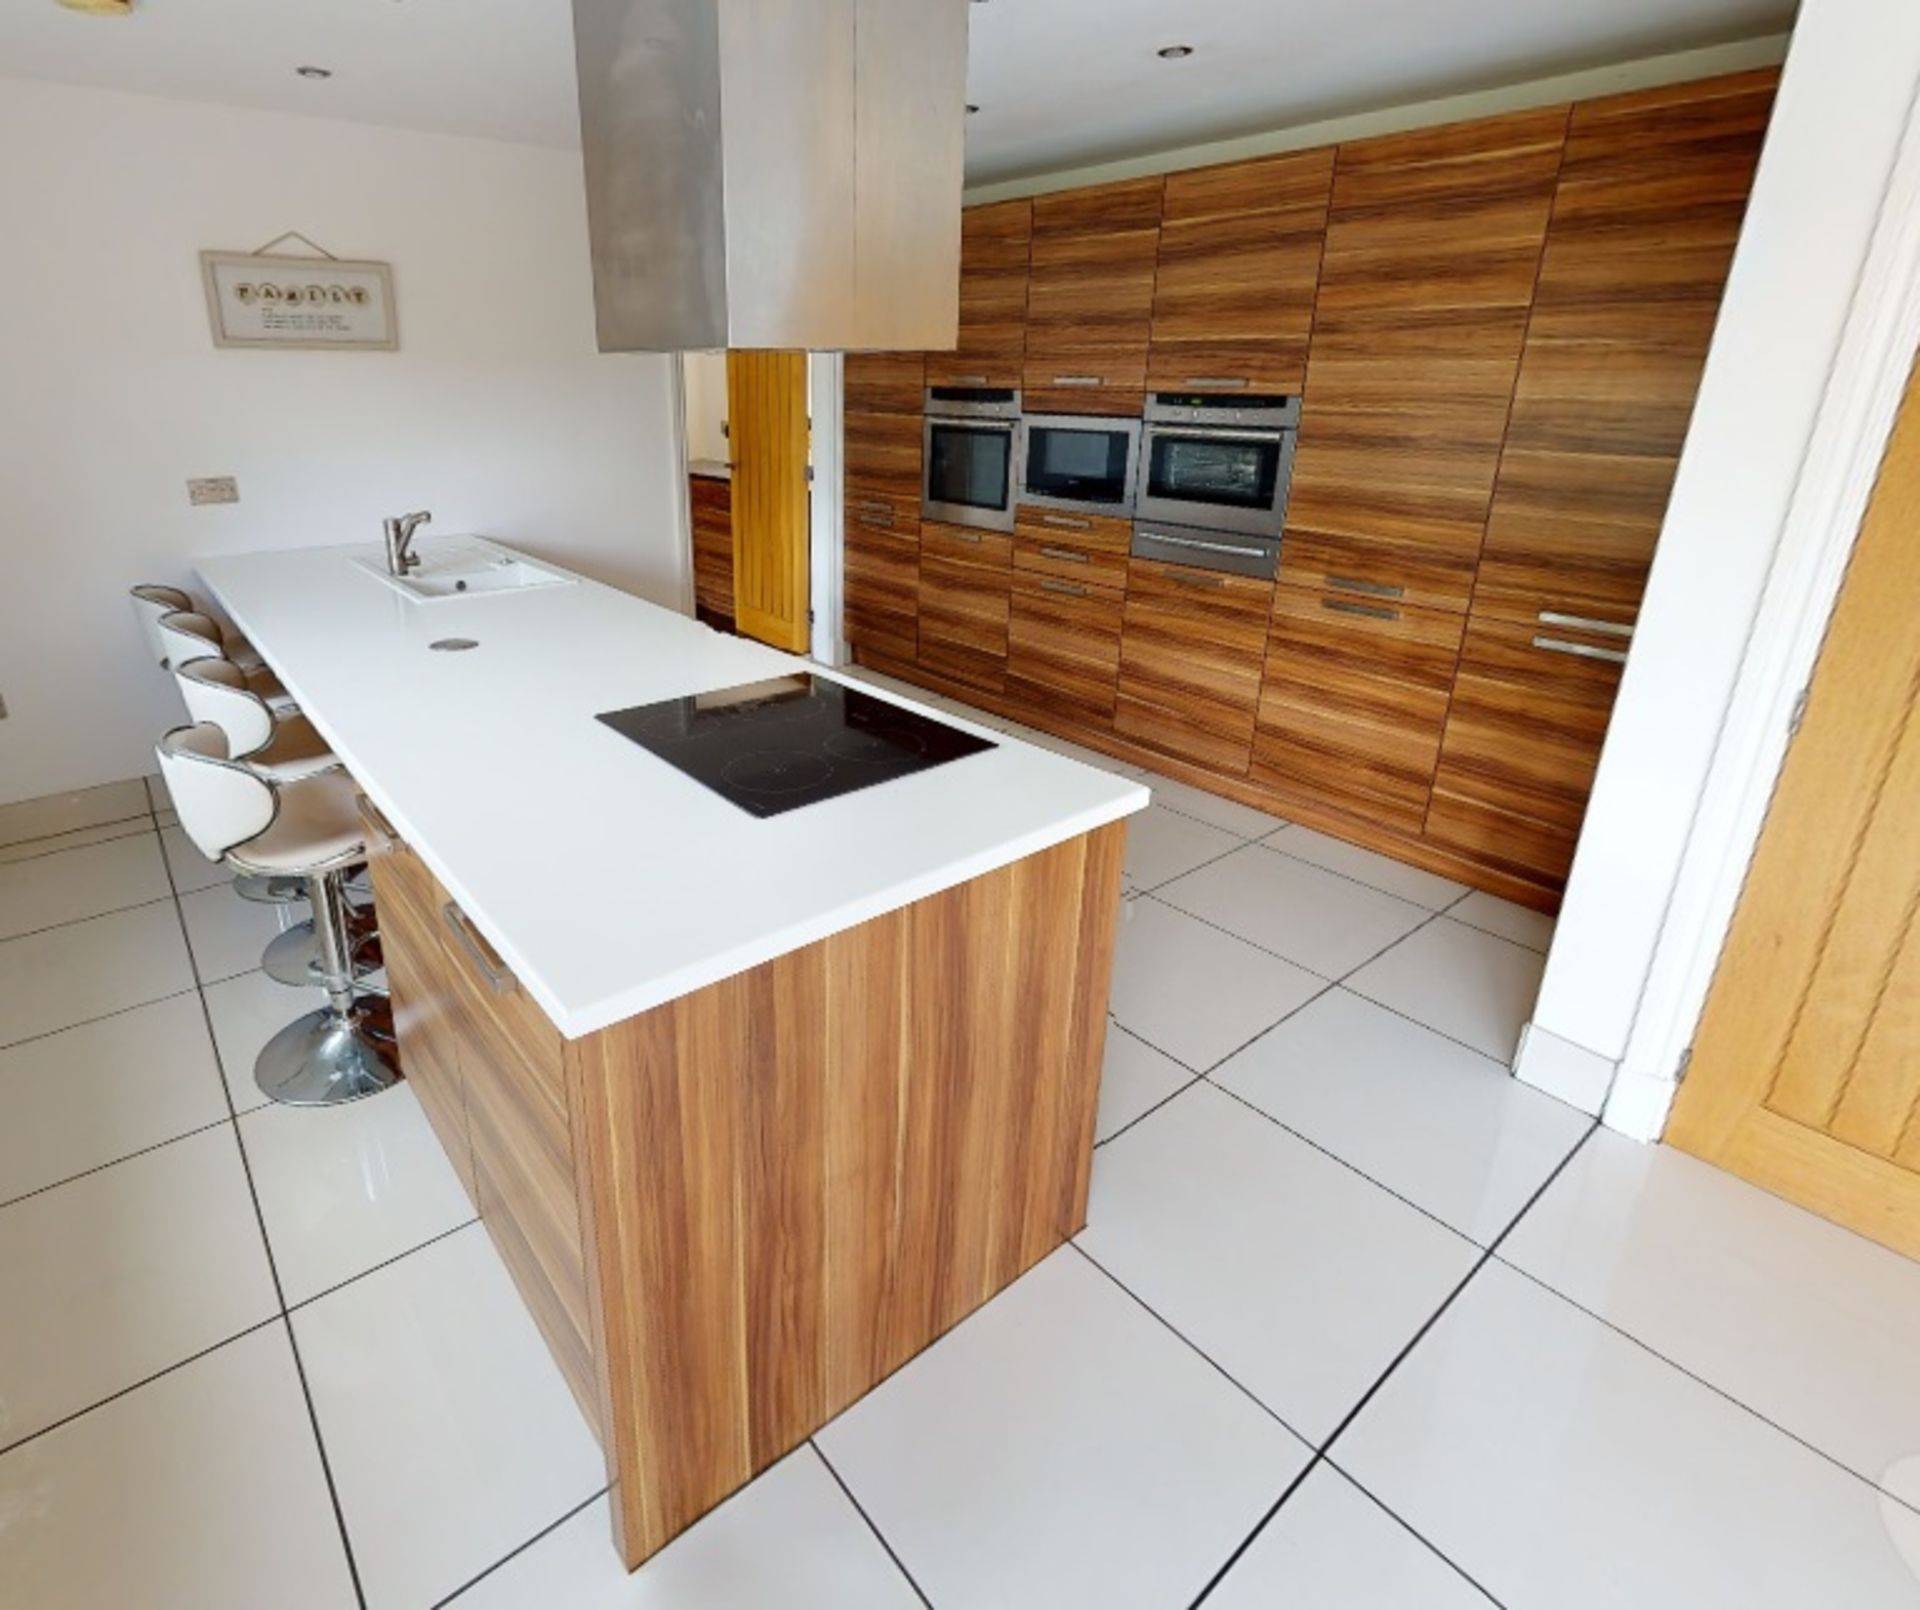 1 x Contemporary Bespoke Fitted Kitchen With Neff Branded Appliances - Collection Date: 1st November